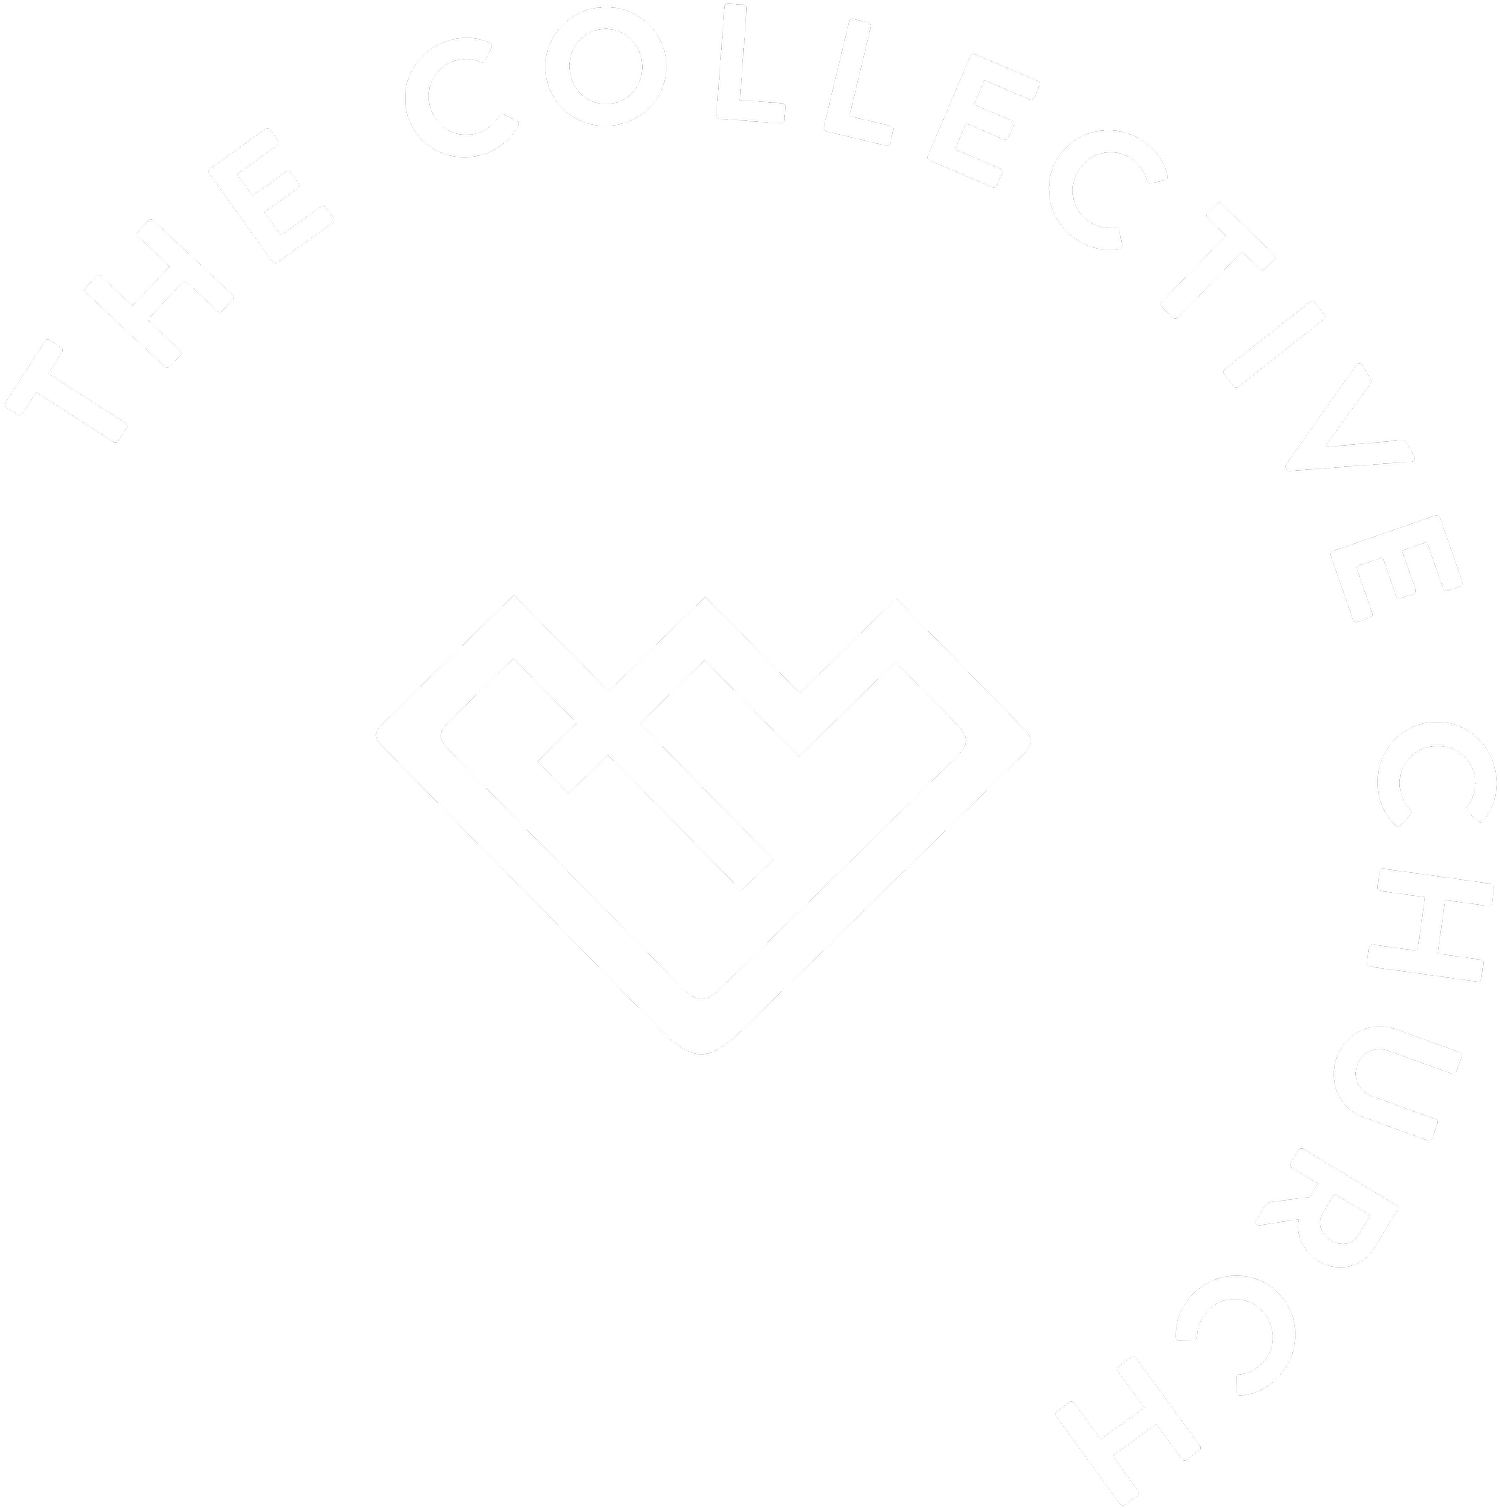 The Collective Church